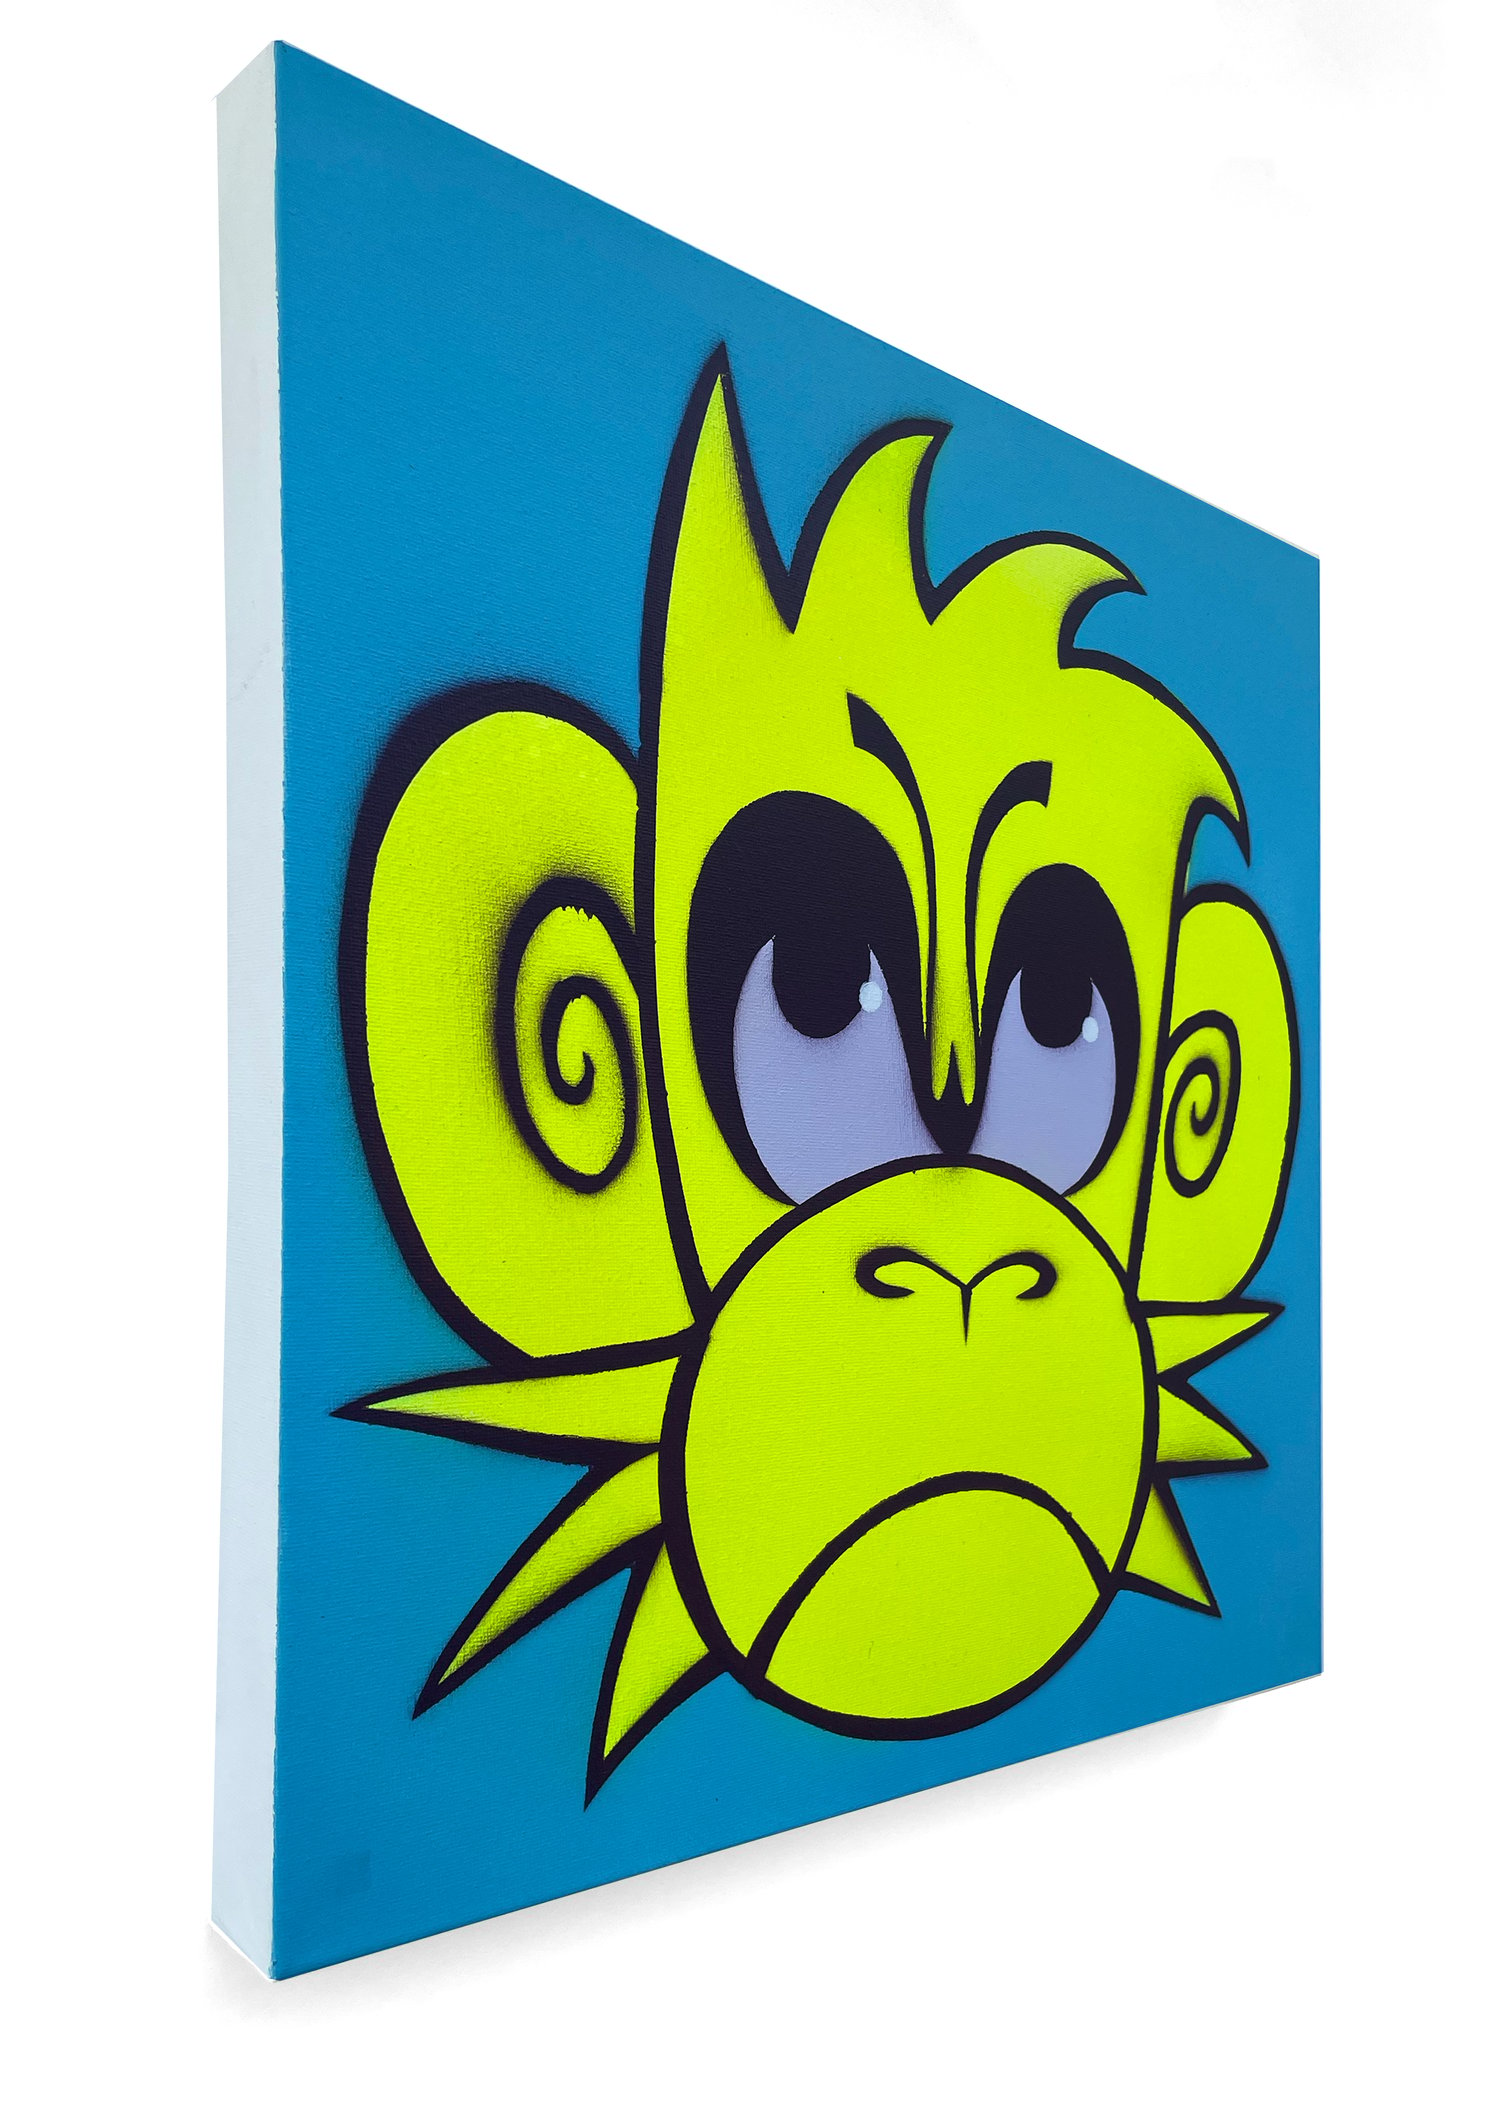 Image of 'Fluoro Mo (Yellow)' by Mighty Monkey